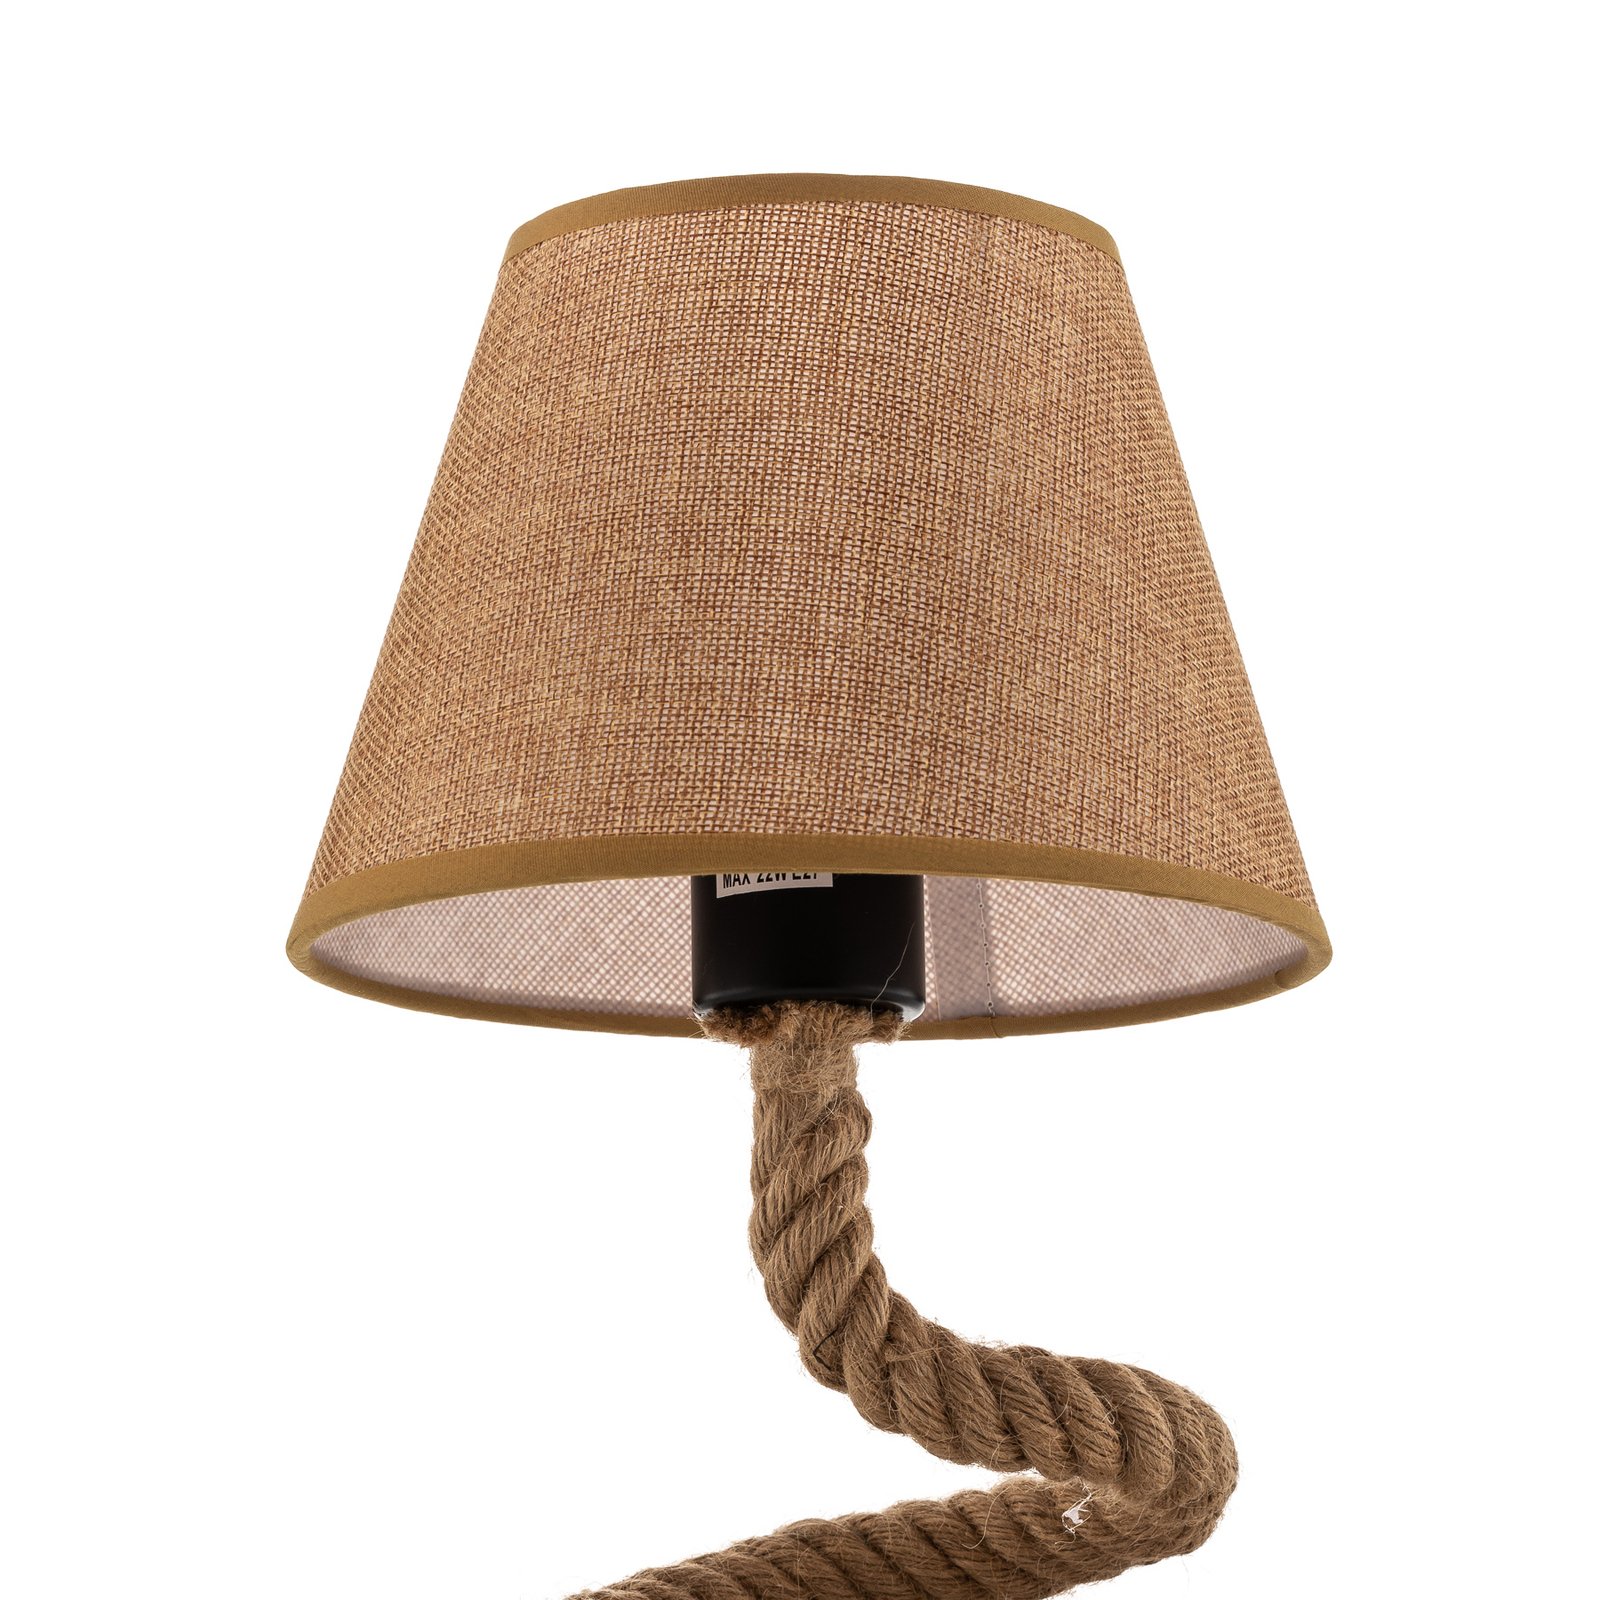 Mauli table lamp made of rope and fabric